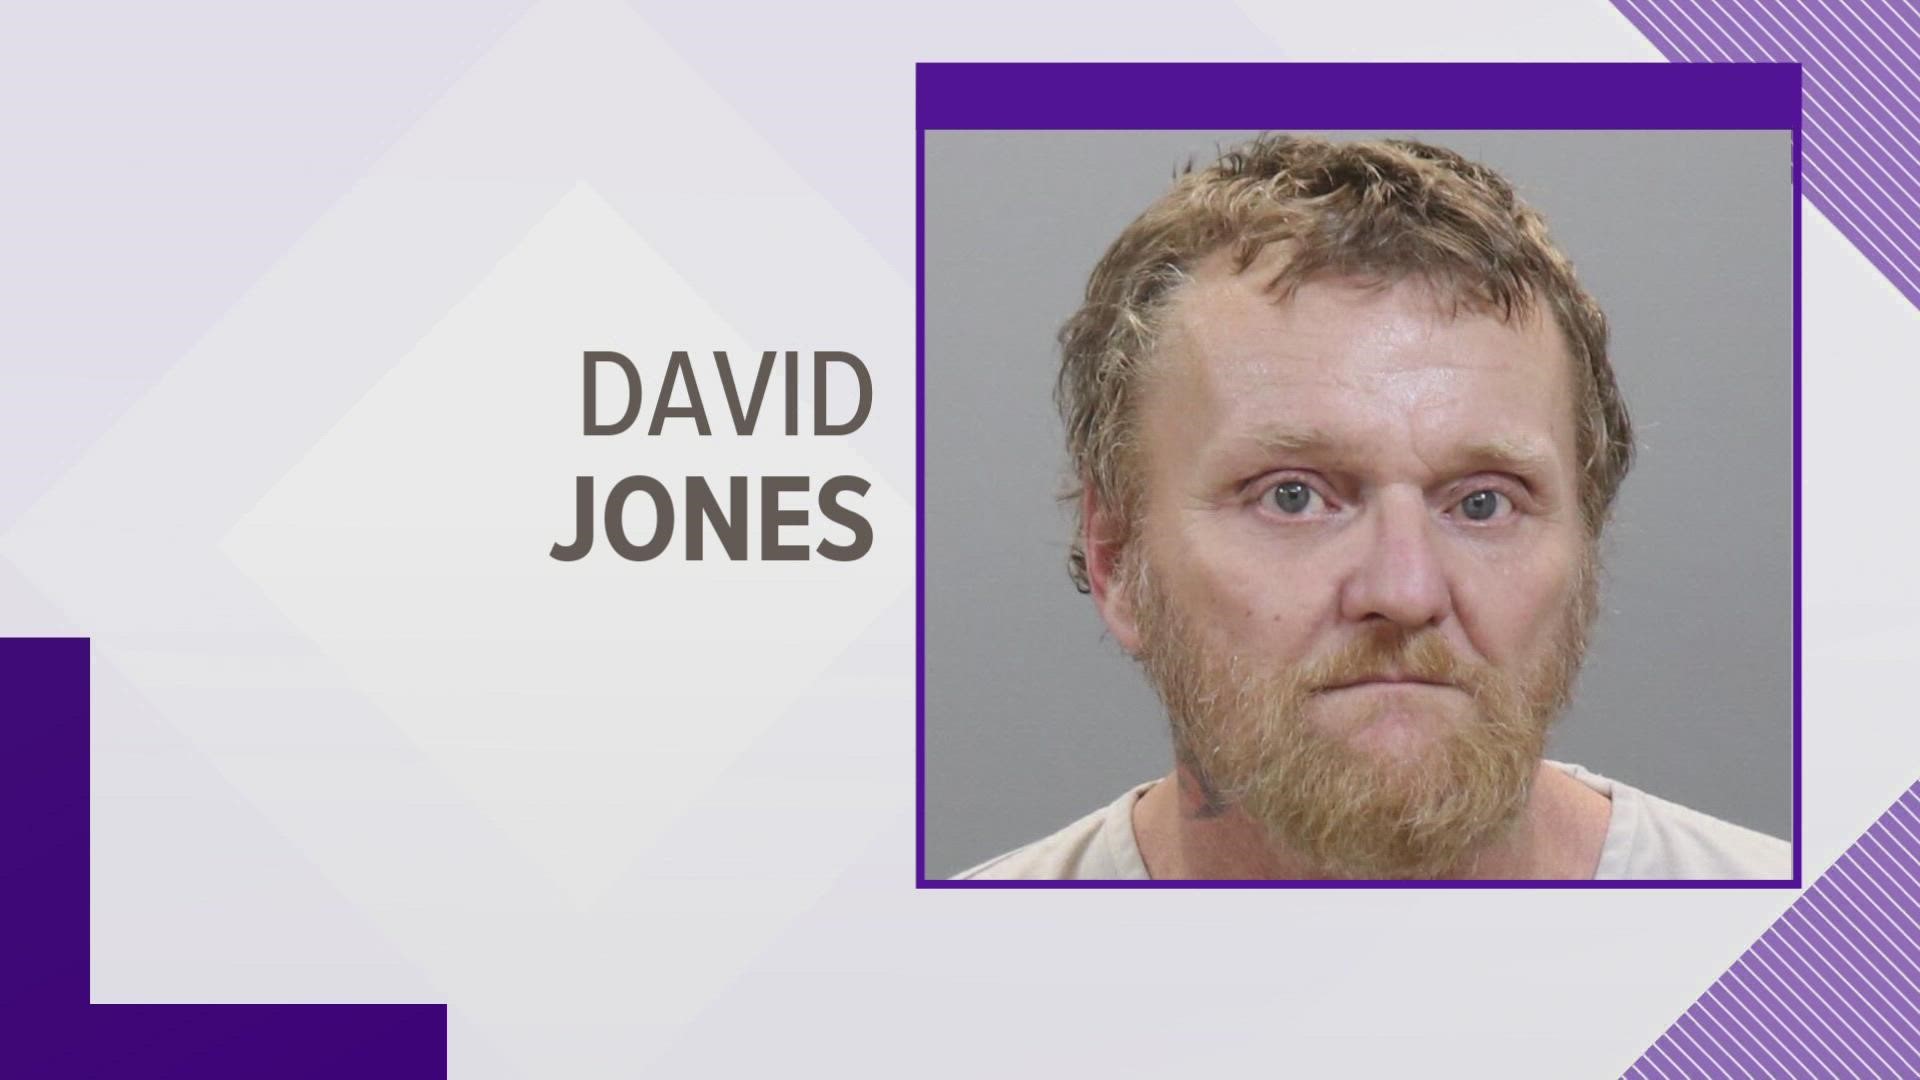 David Ronald Jones, 52, pled guilty to four counts of auto burglary and one count each of unlawful possession of a weapon, escape, assault and theft.